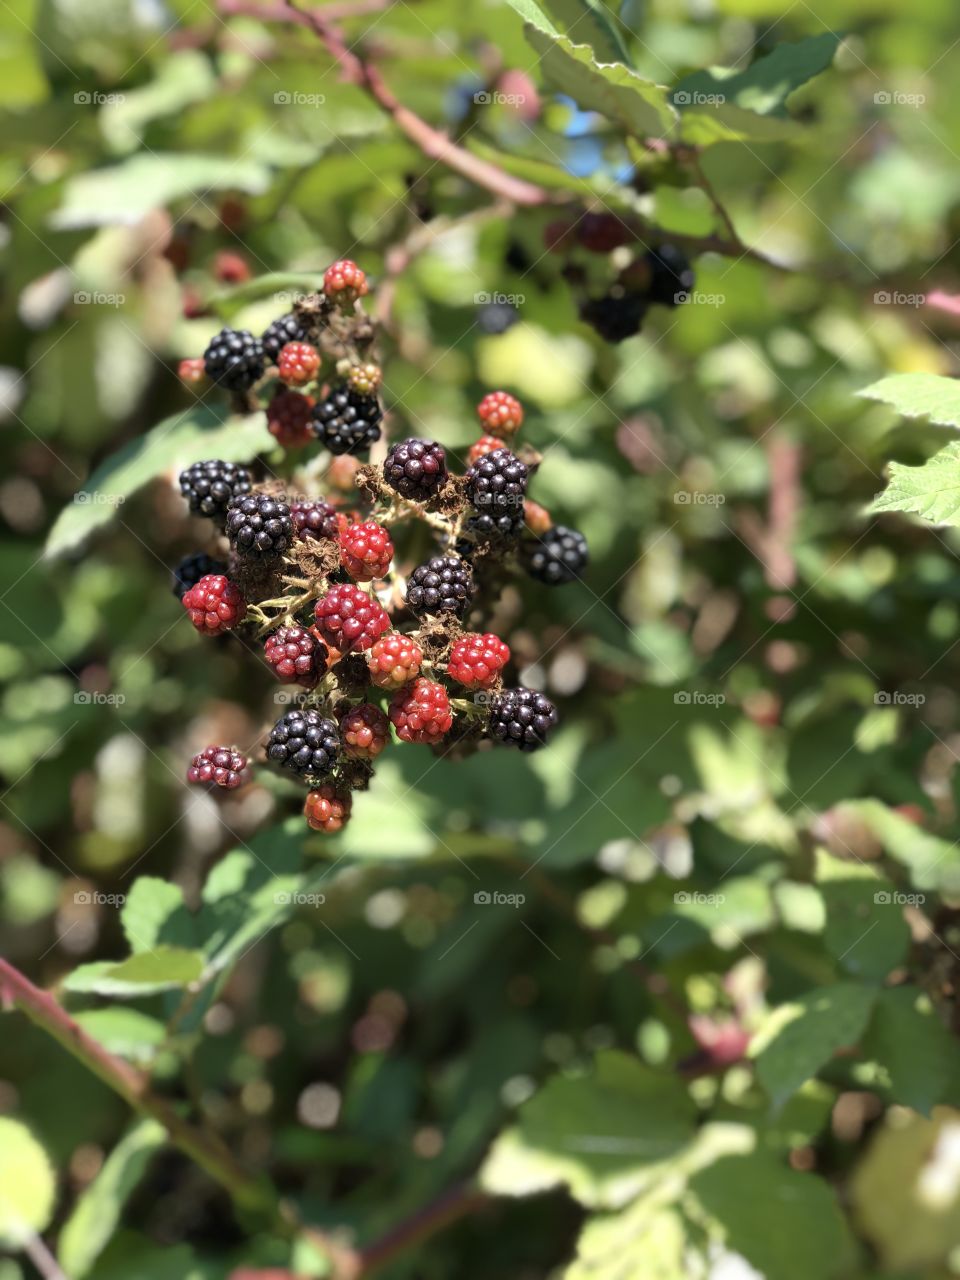 Blackberries at the park on a sunny day 